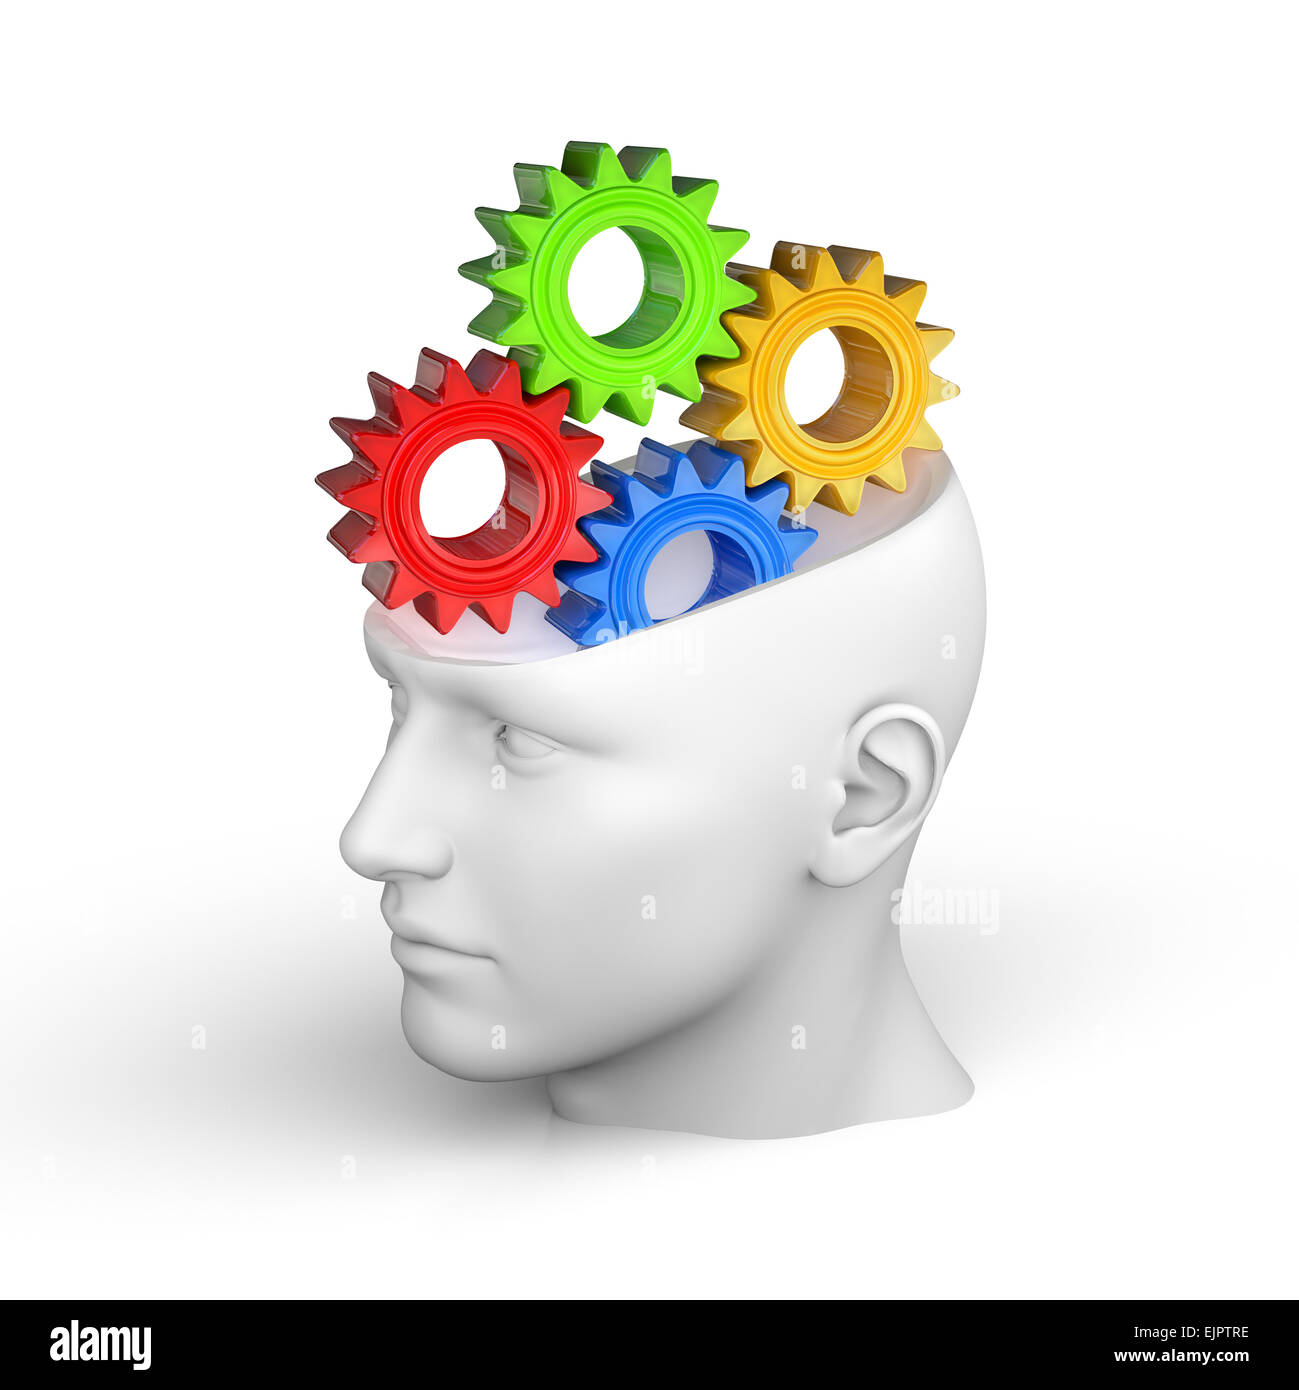 Creative concept of the human brain - Thinking Stock Photo